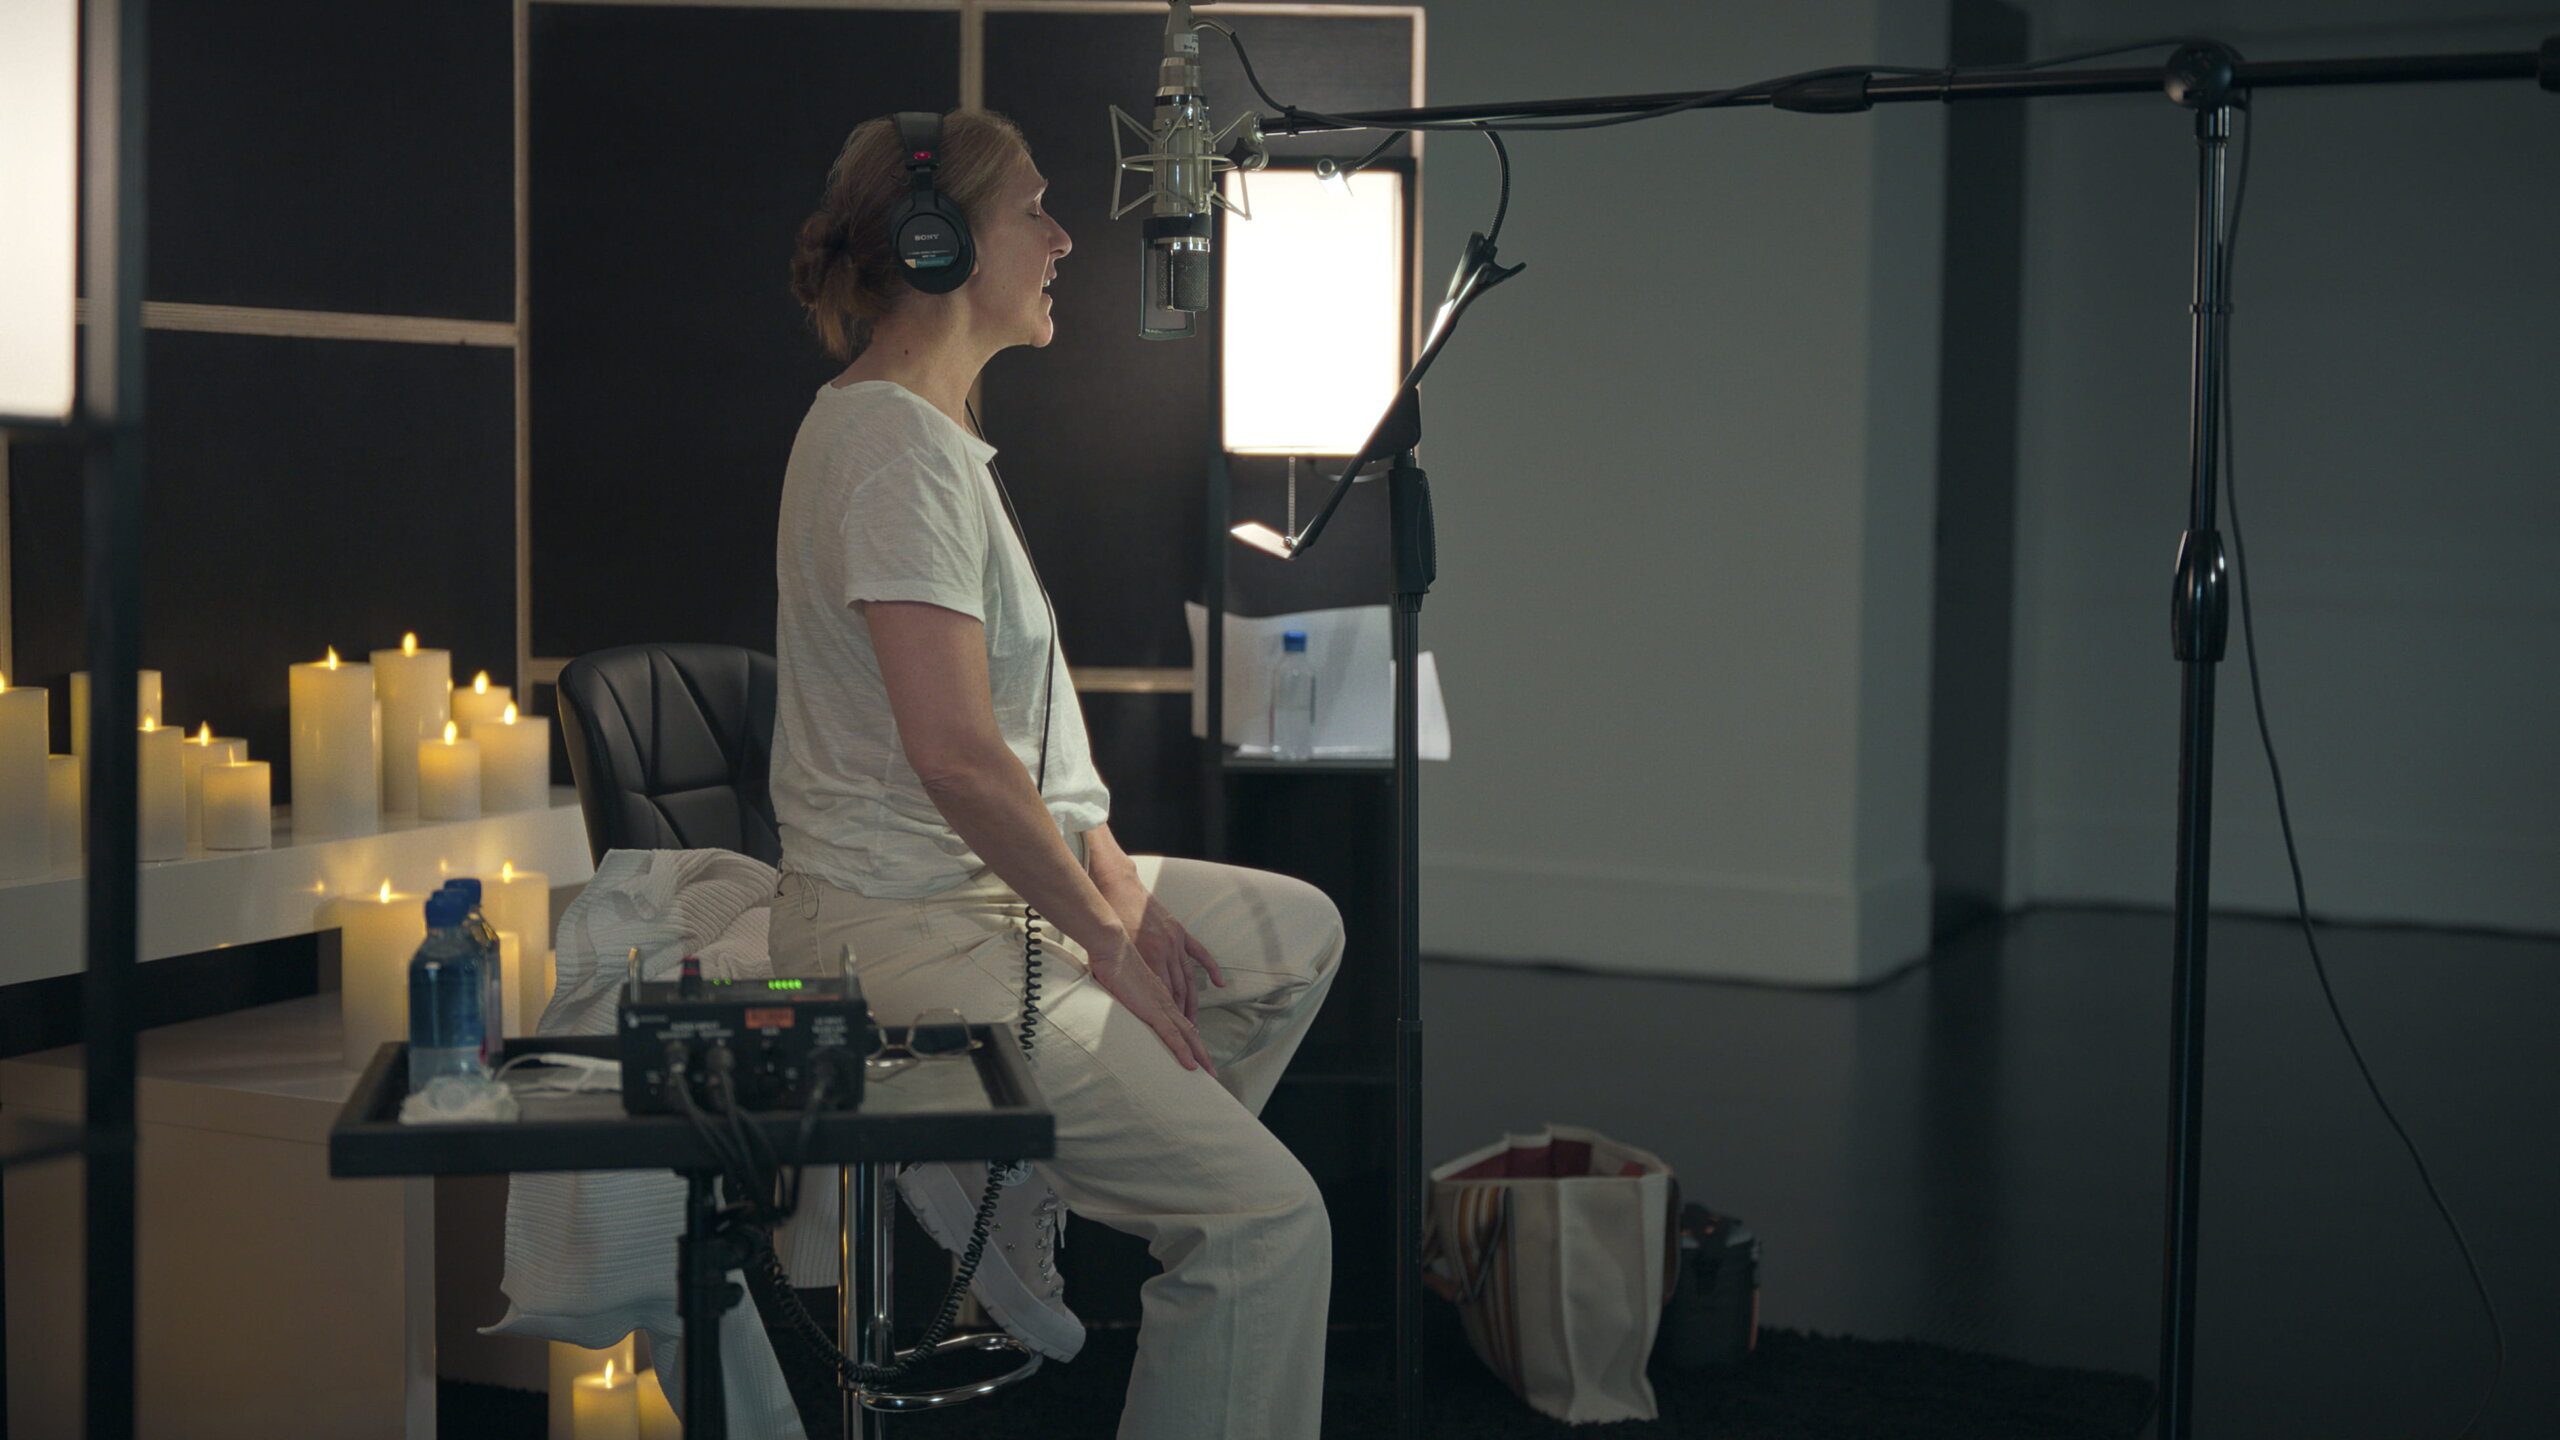 Celine Dion wears white and headphones; she sits in front of a microphone, singing. Behind her are white candles.